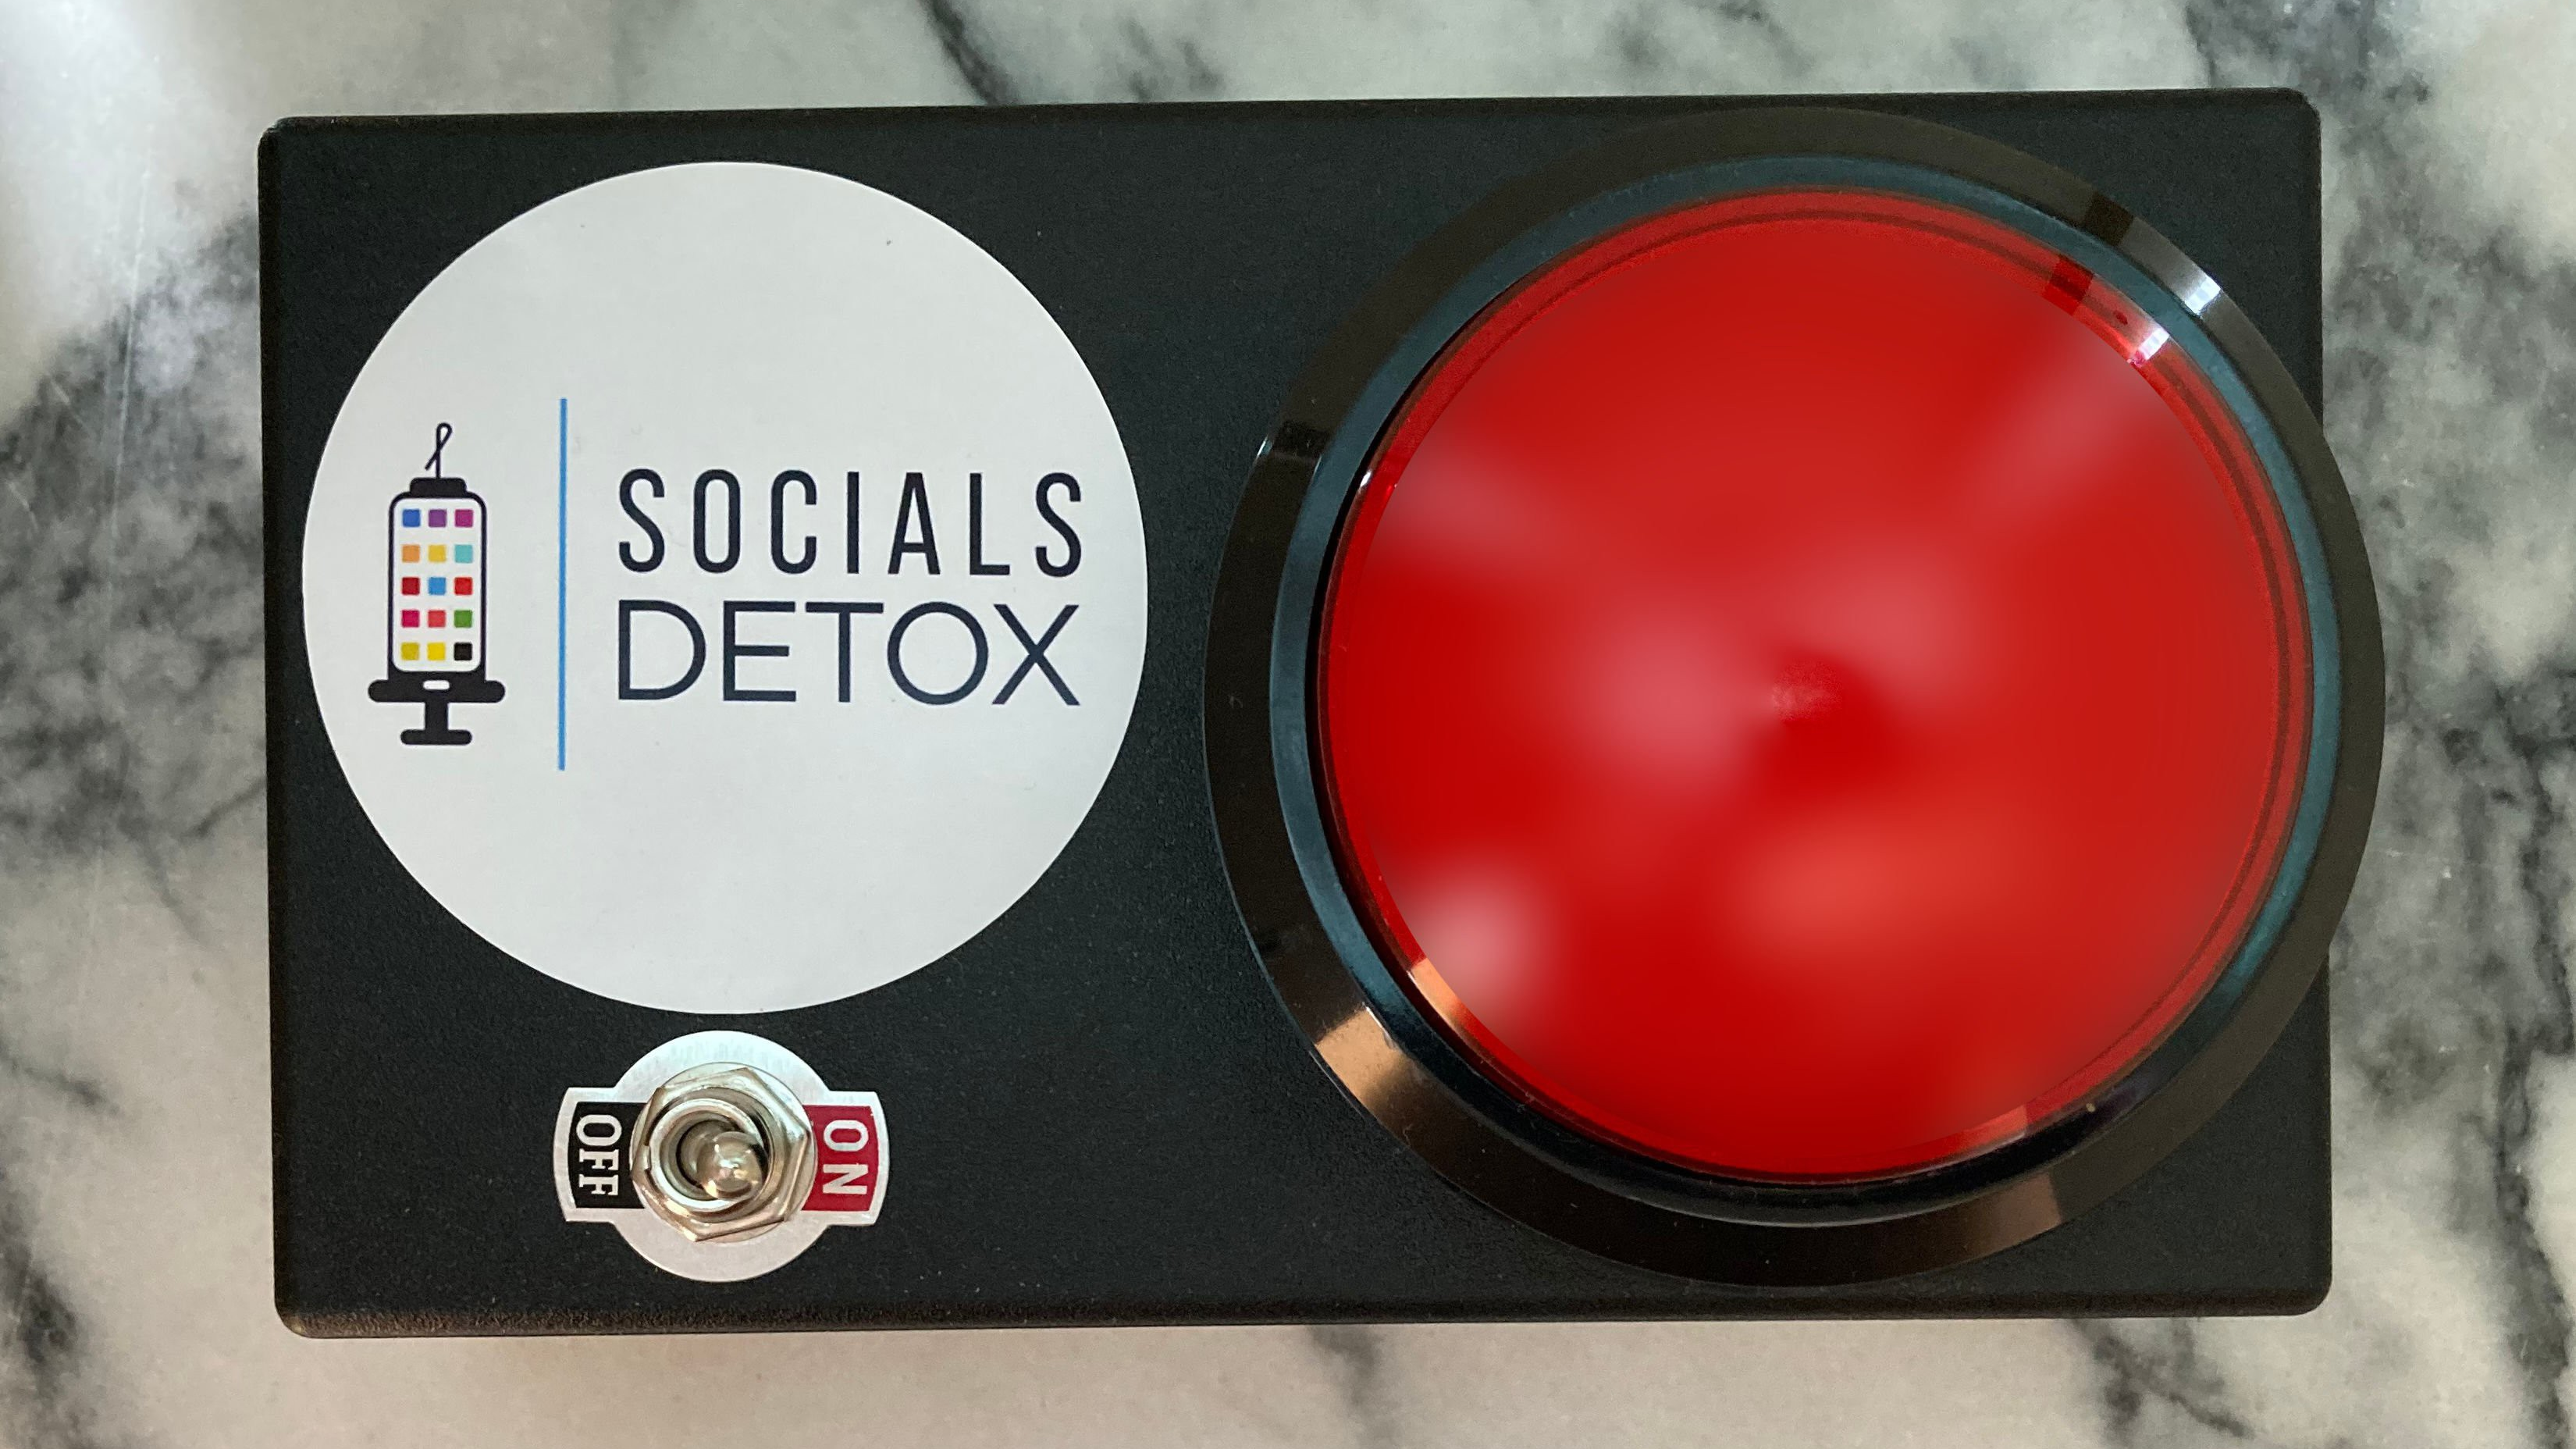 Hit that big red button for instant social media detox